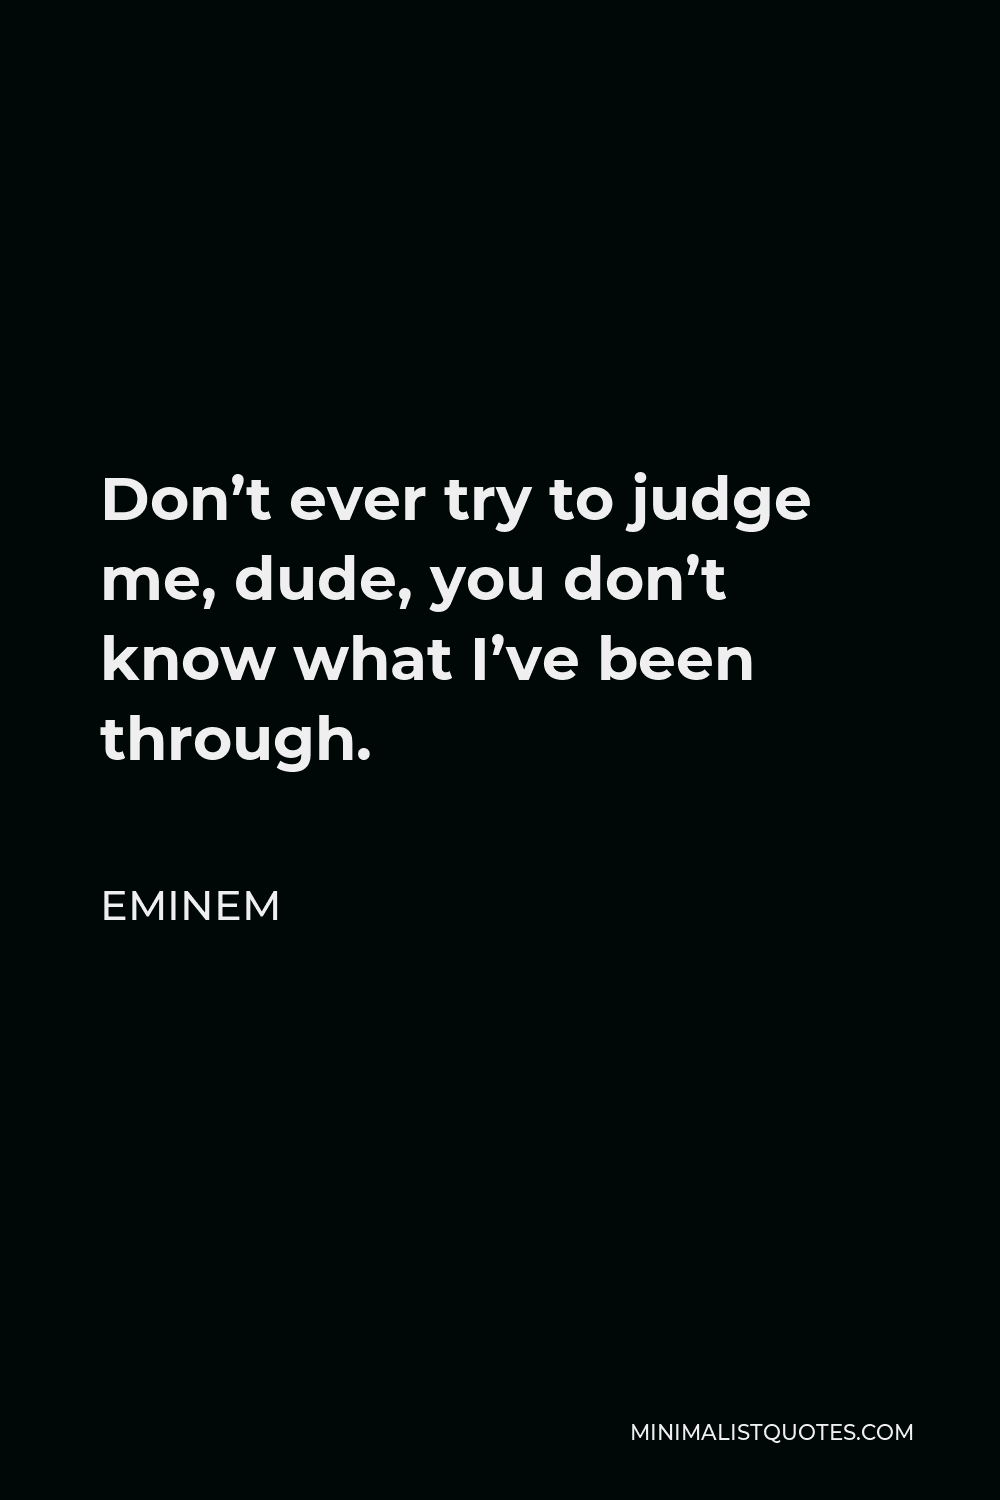 Don't Judge Me Quotes Wallpapers - Wallpaper Cave